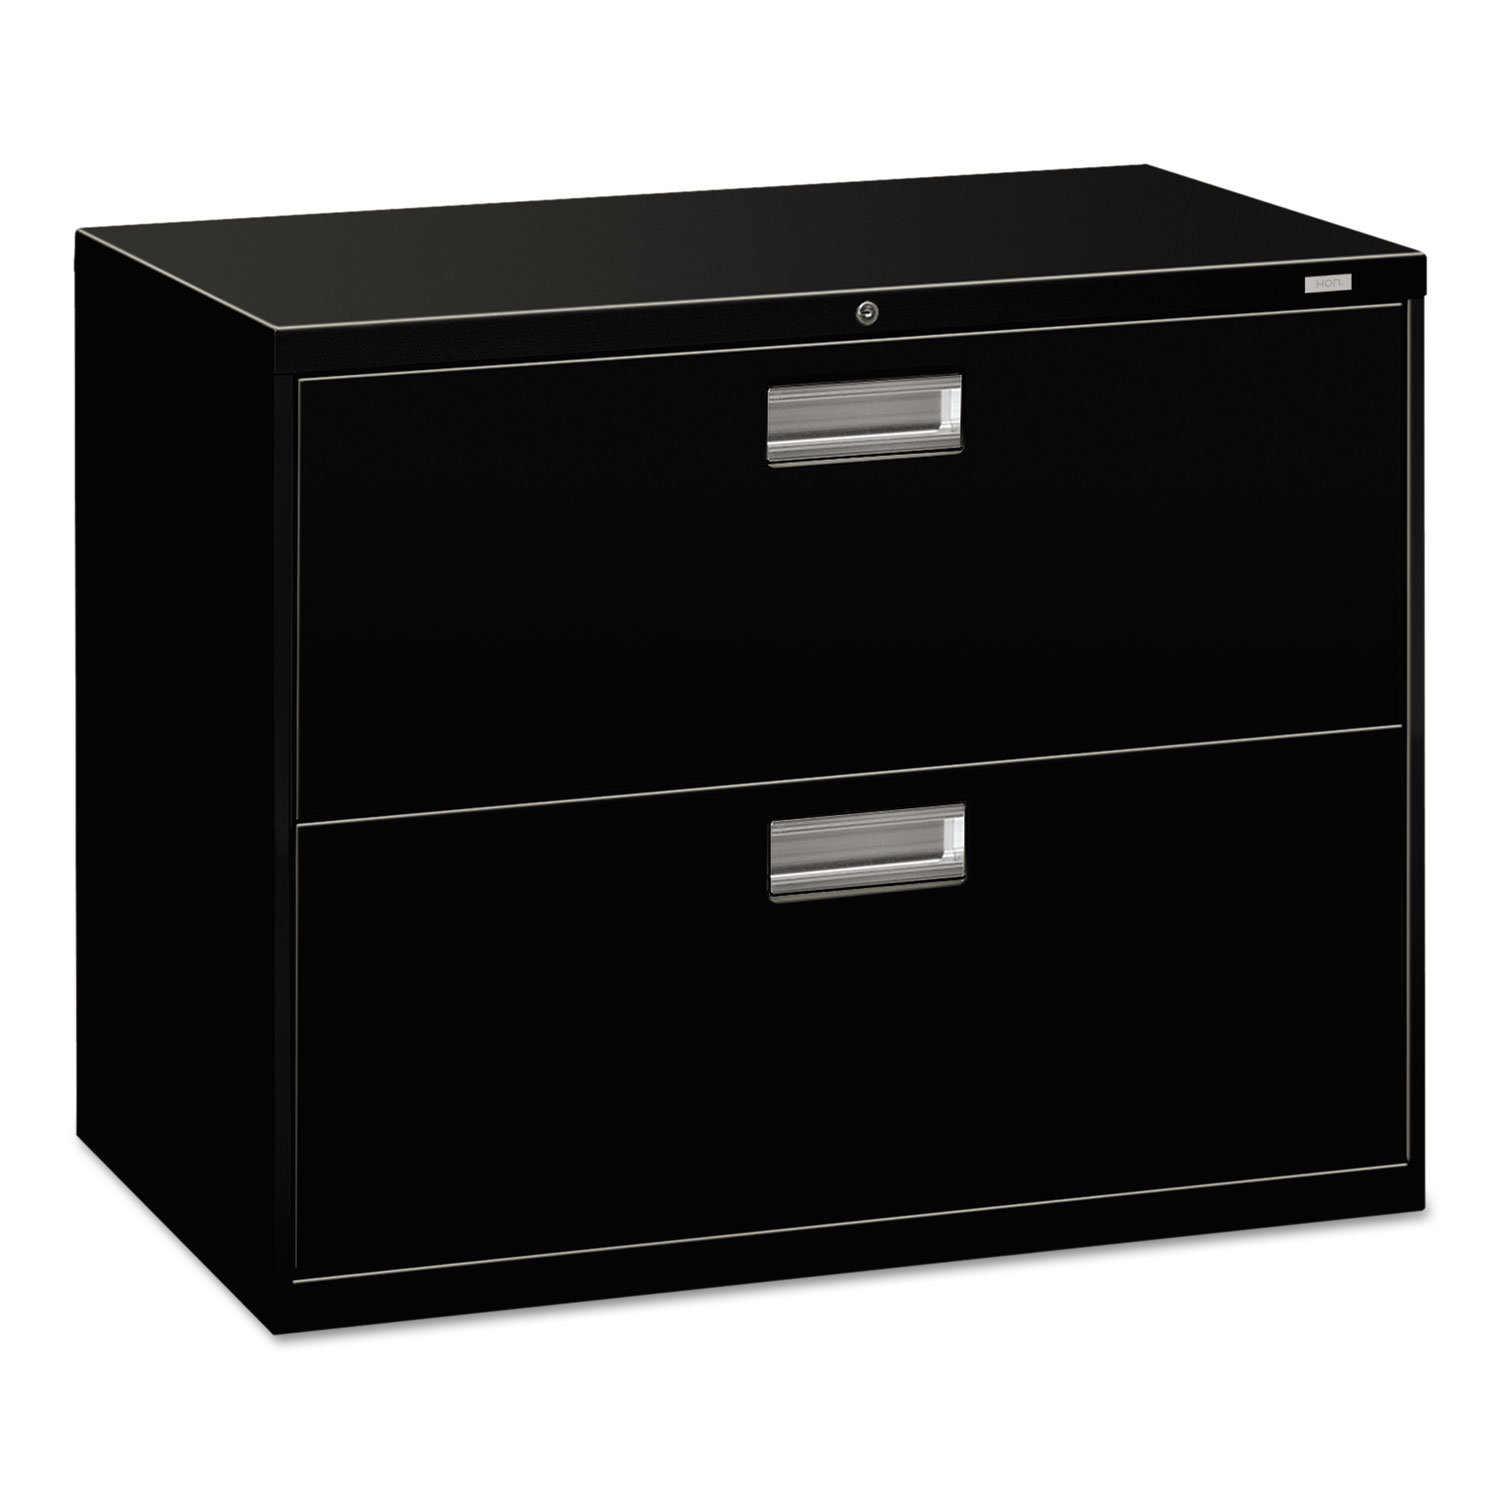 600 Series Two-Drawer Lateral File, 36w x 19-1/4d, Black